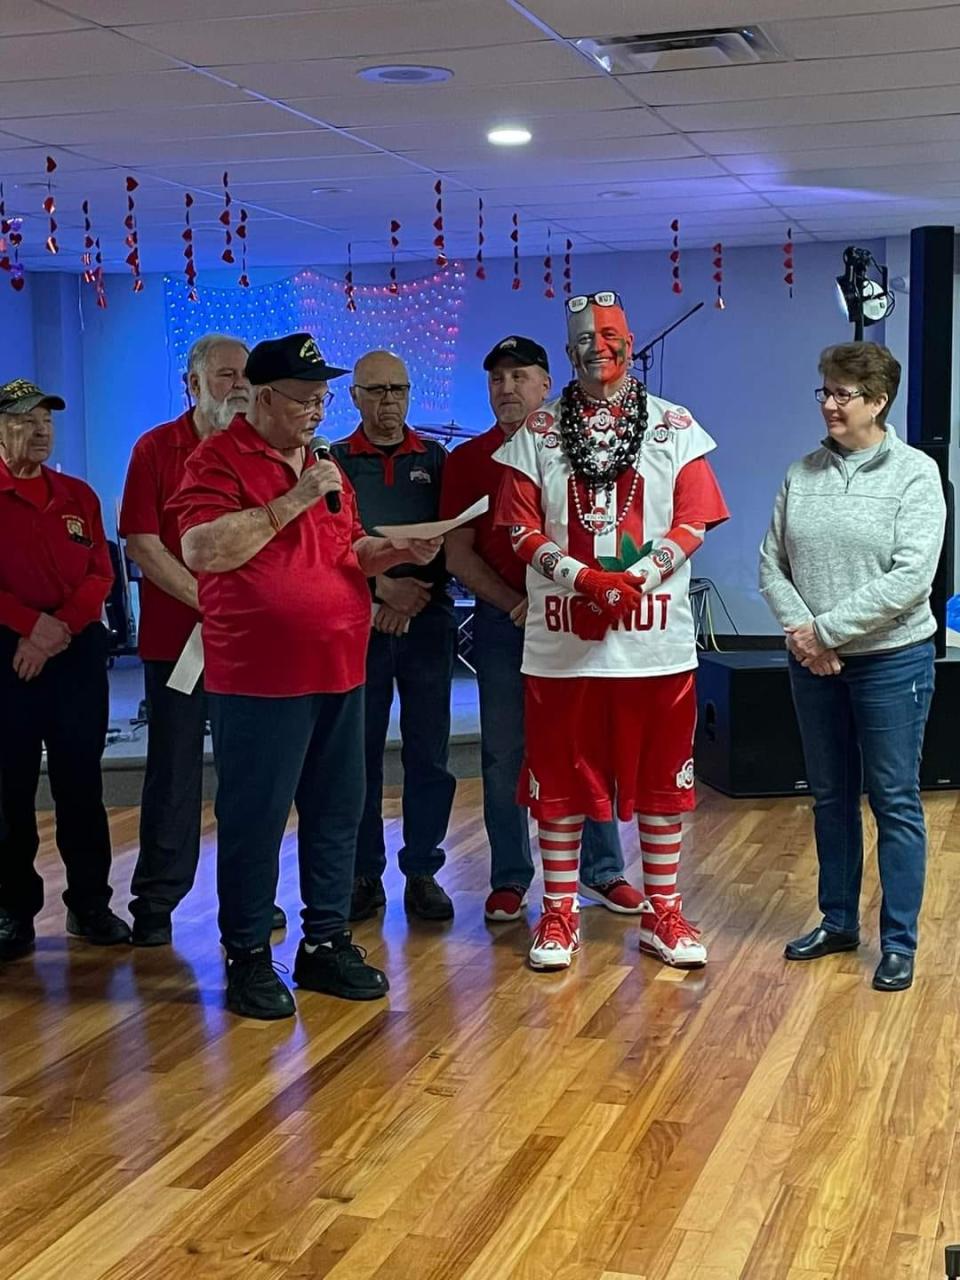 Clyde VFW Post 3343 Trustee Mo Marks presents $10,000 to Jon Paul Peters, known as Big Nut, for the Big Nut Scholarship Fund.